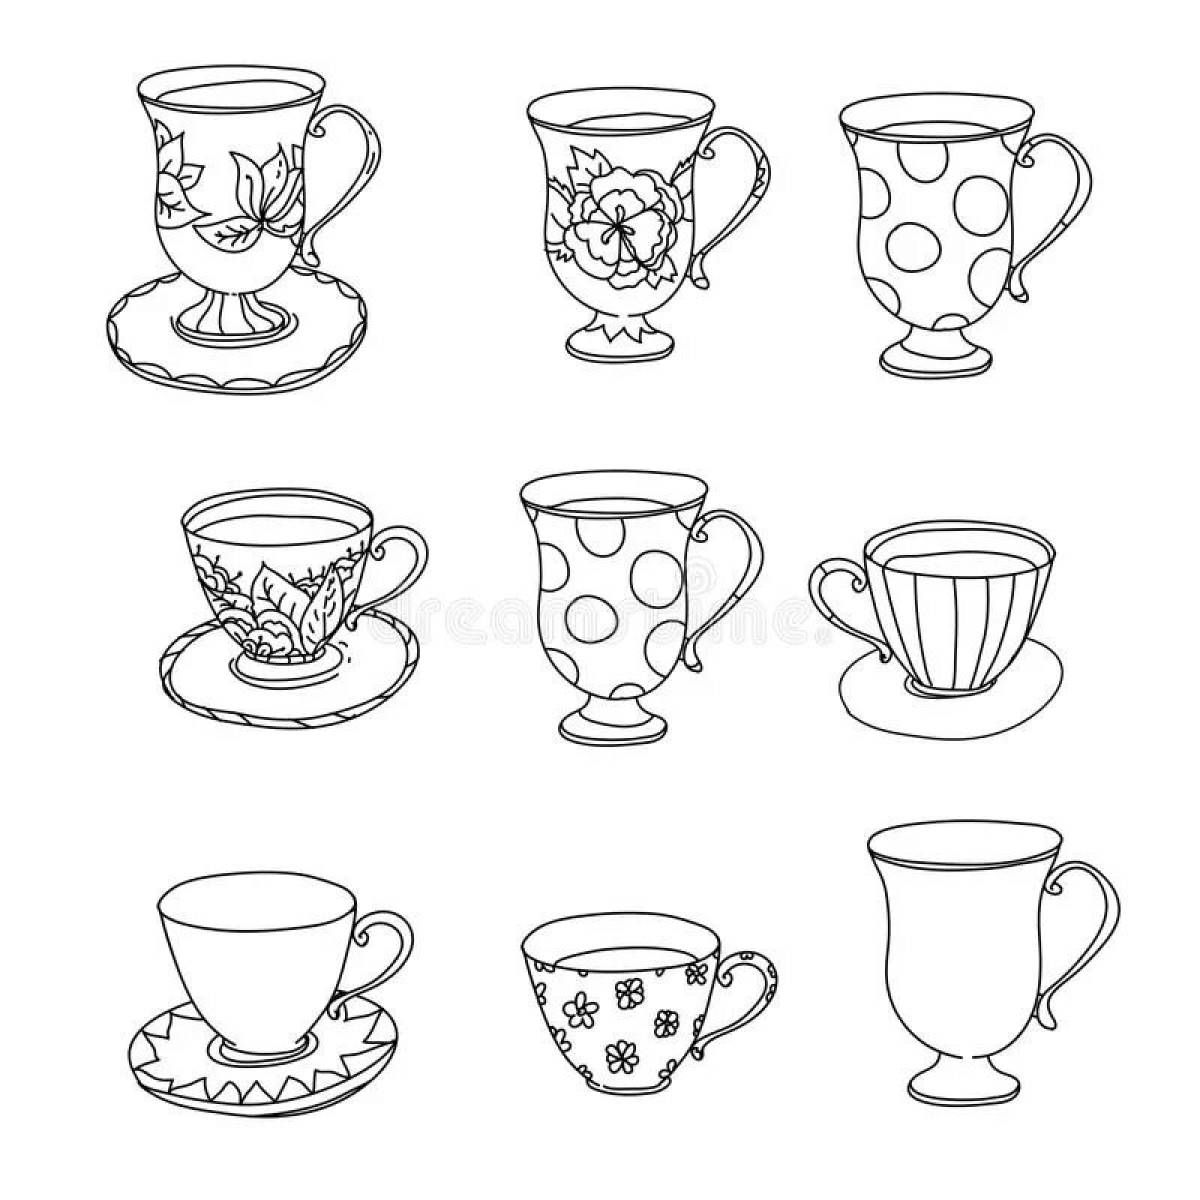 Fine mugs and cups coloring page